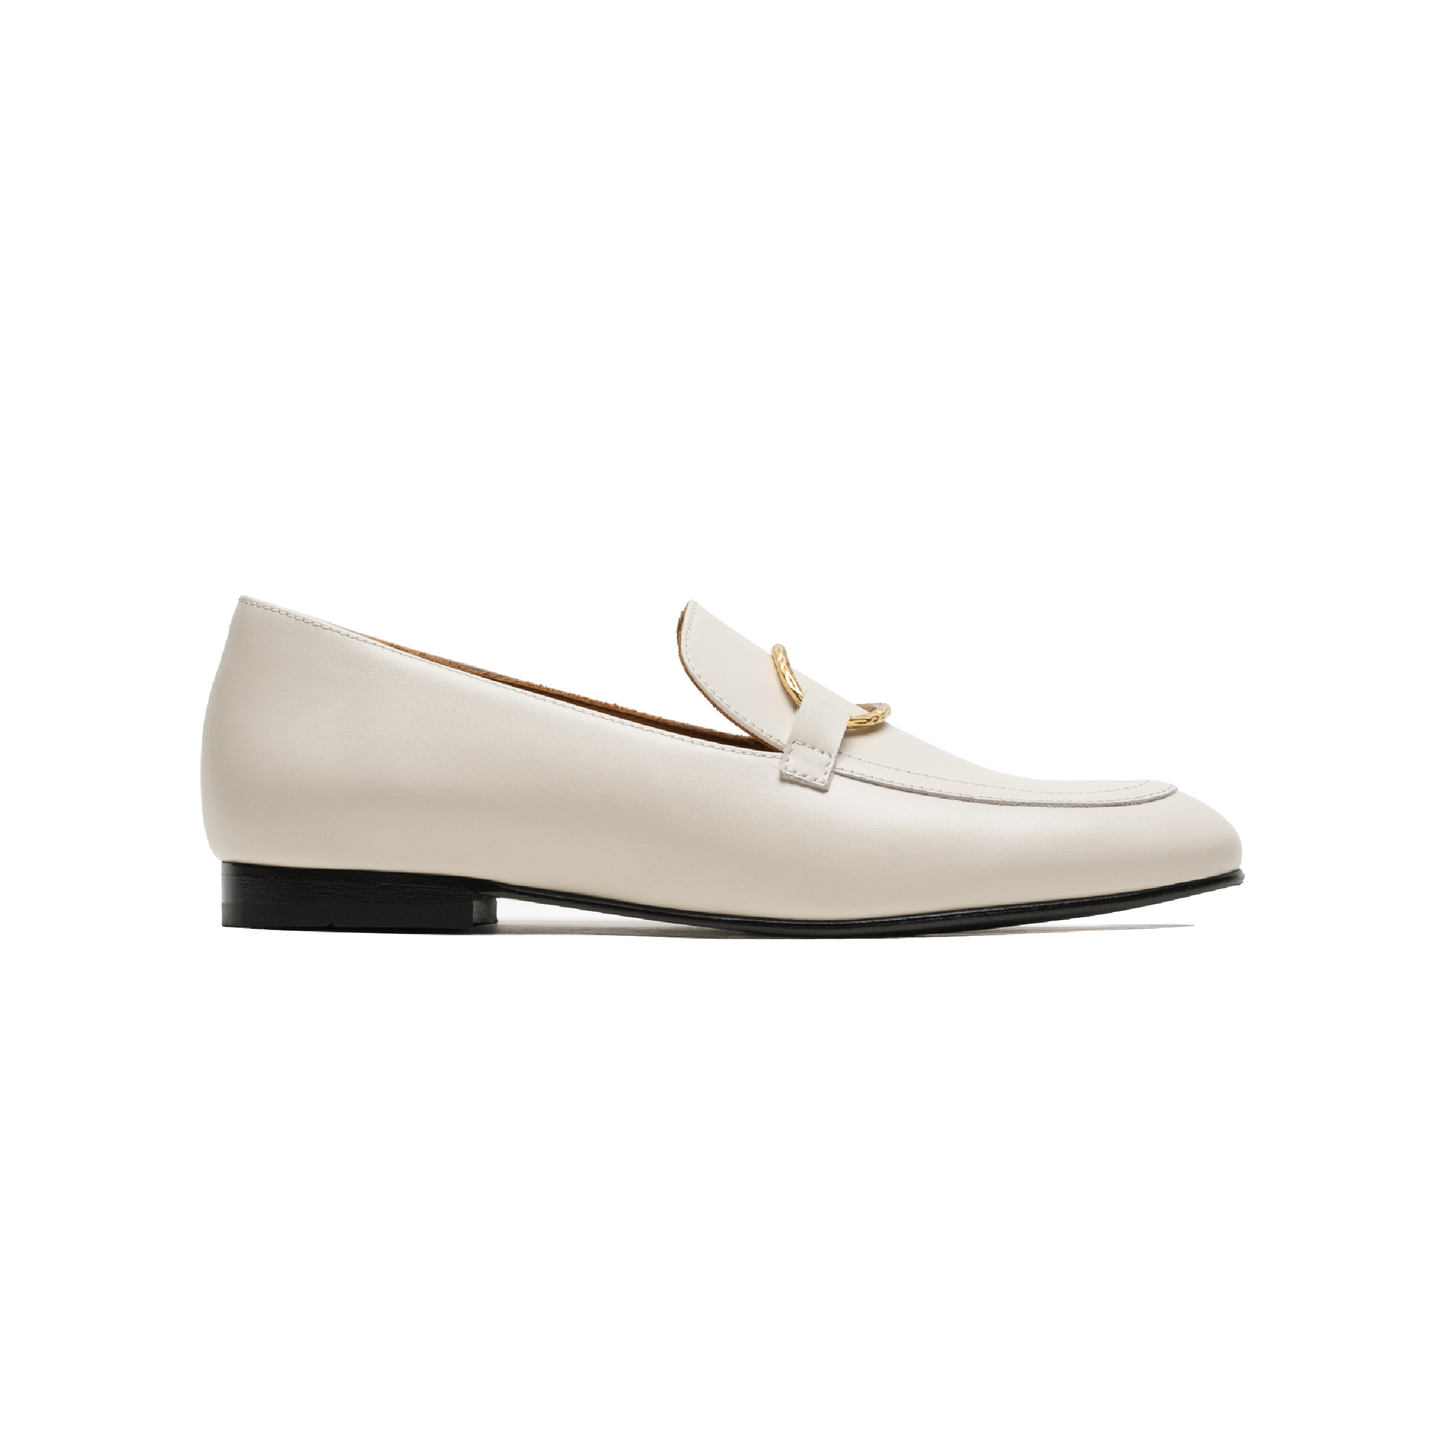 Off-White Tomboy Chic Loafers